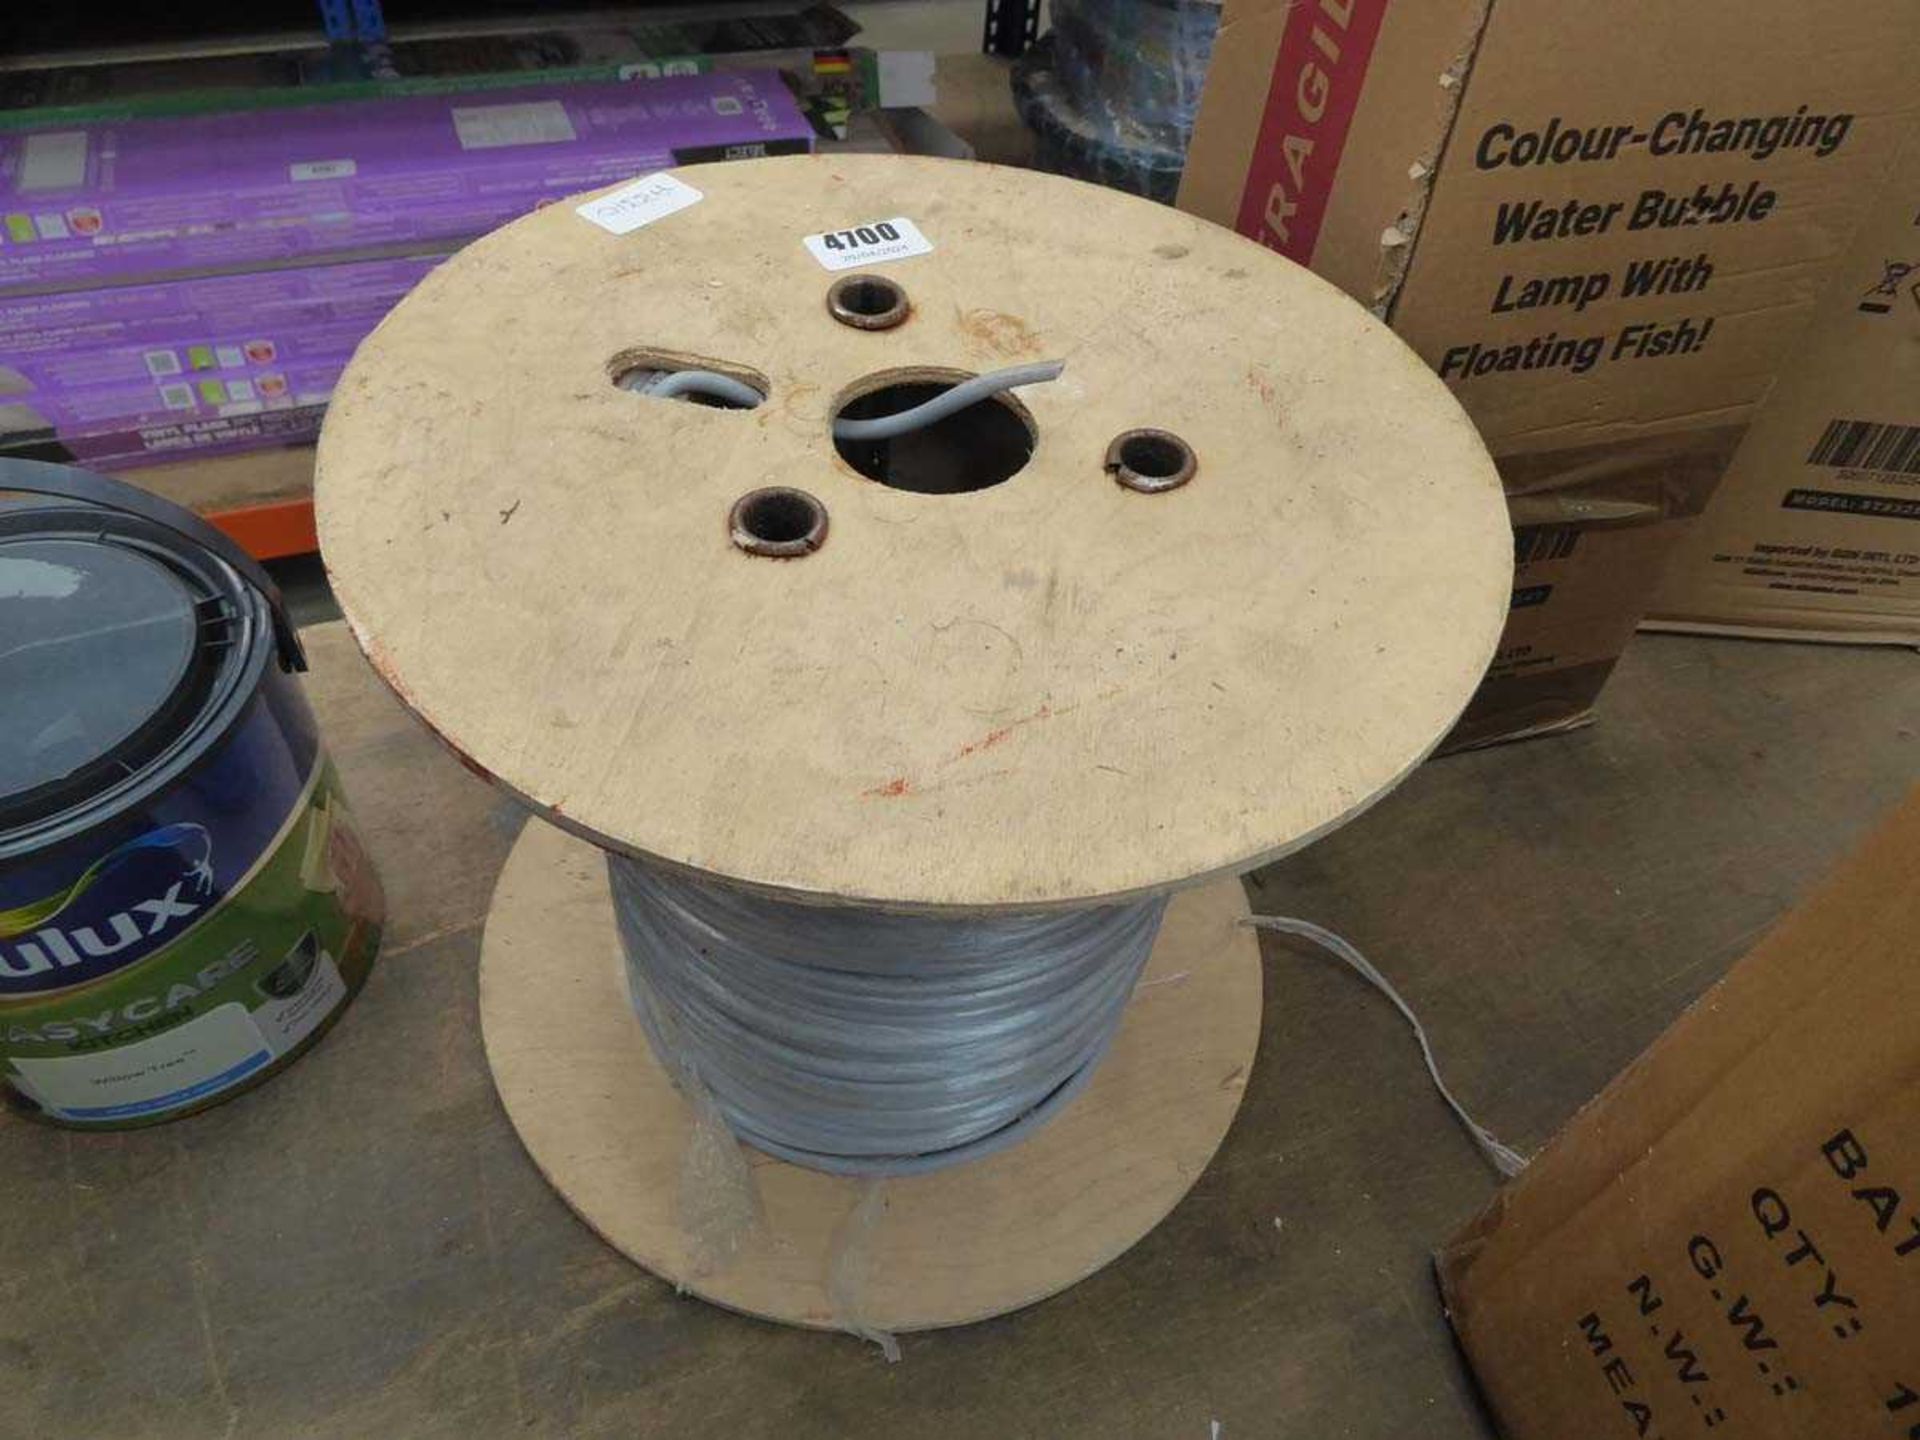 Roll of cable